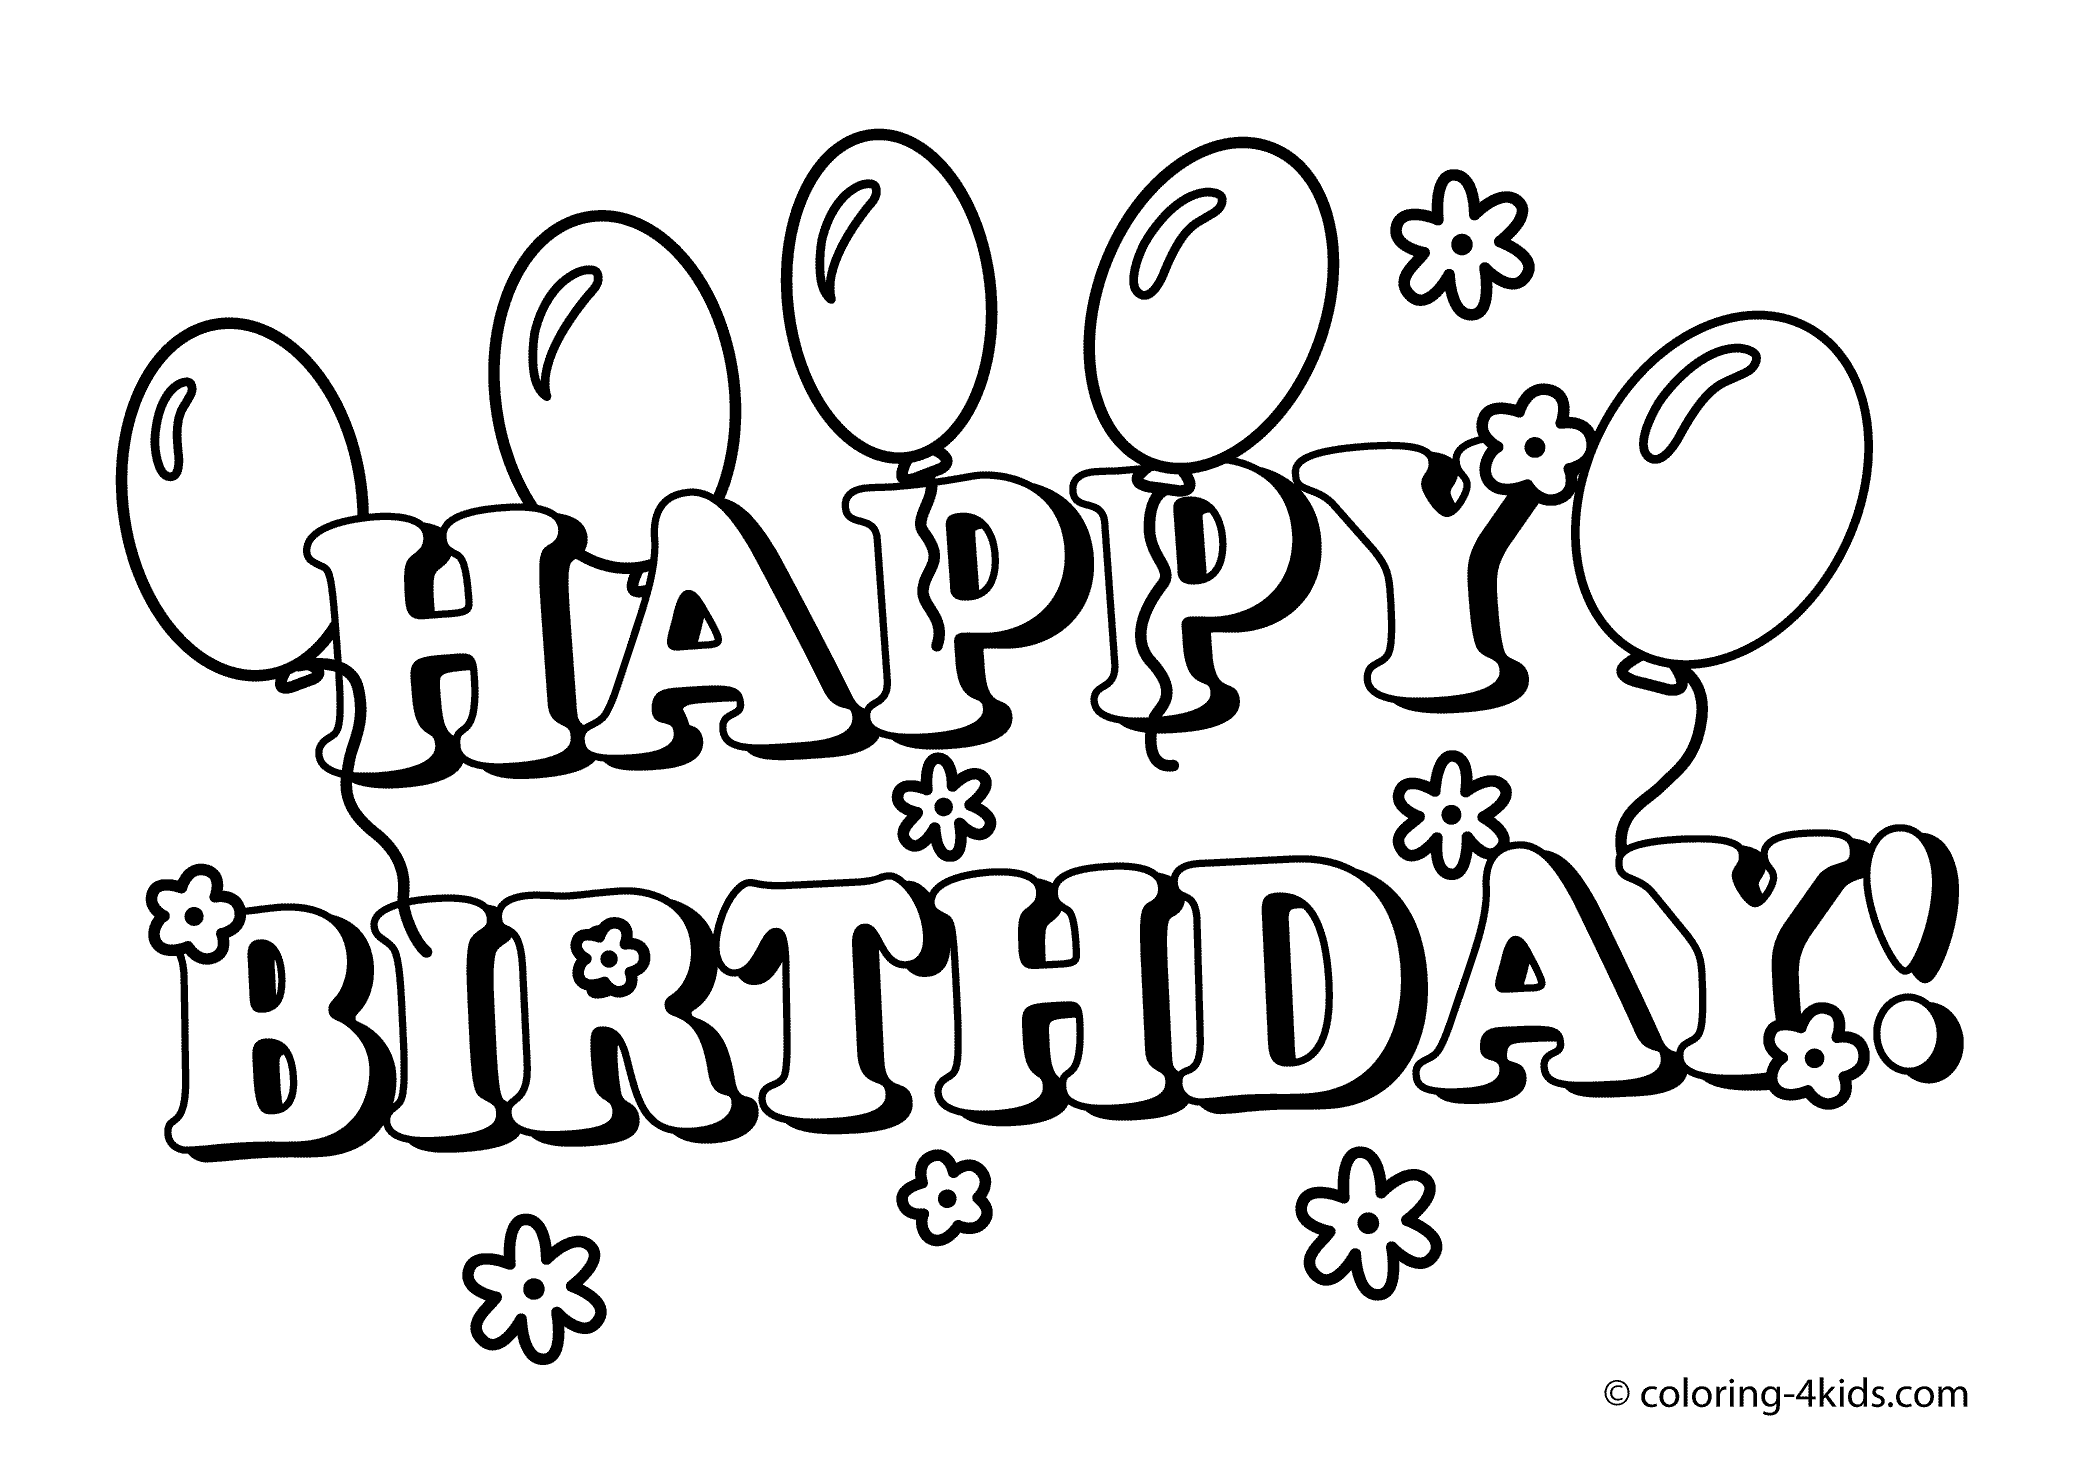 Happy birthday black and white clipart for guys